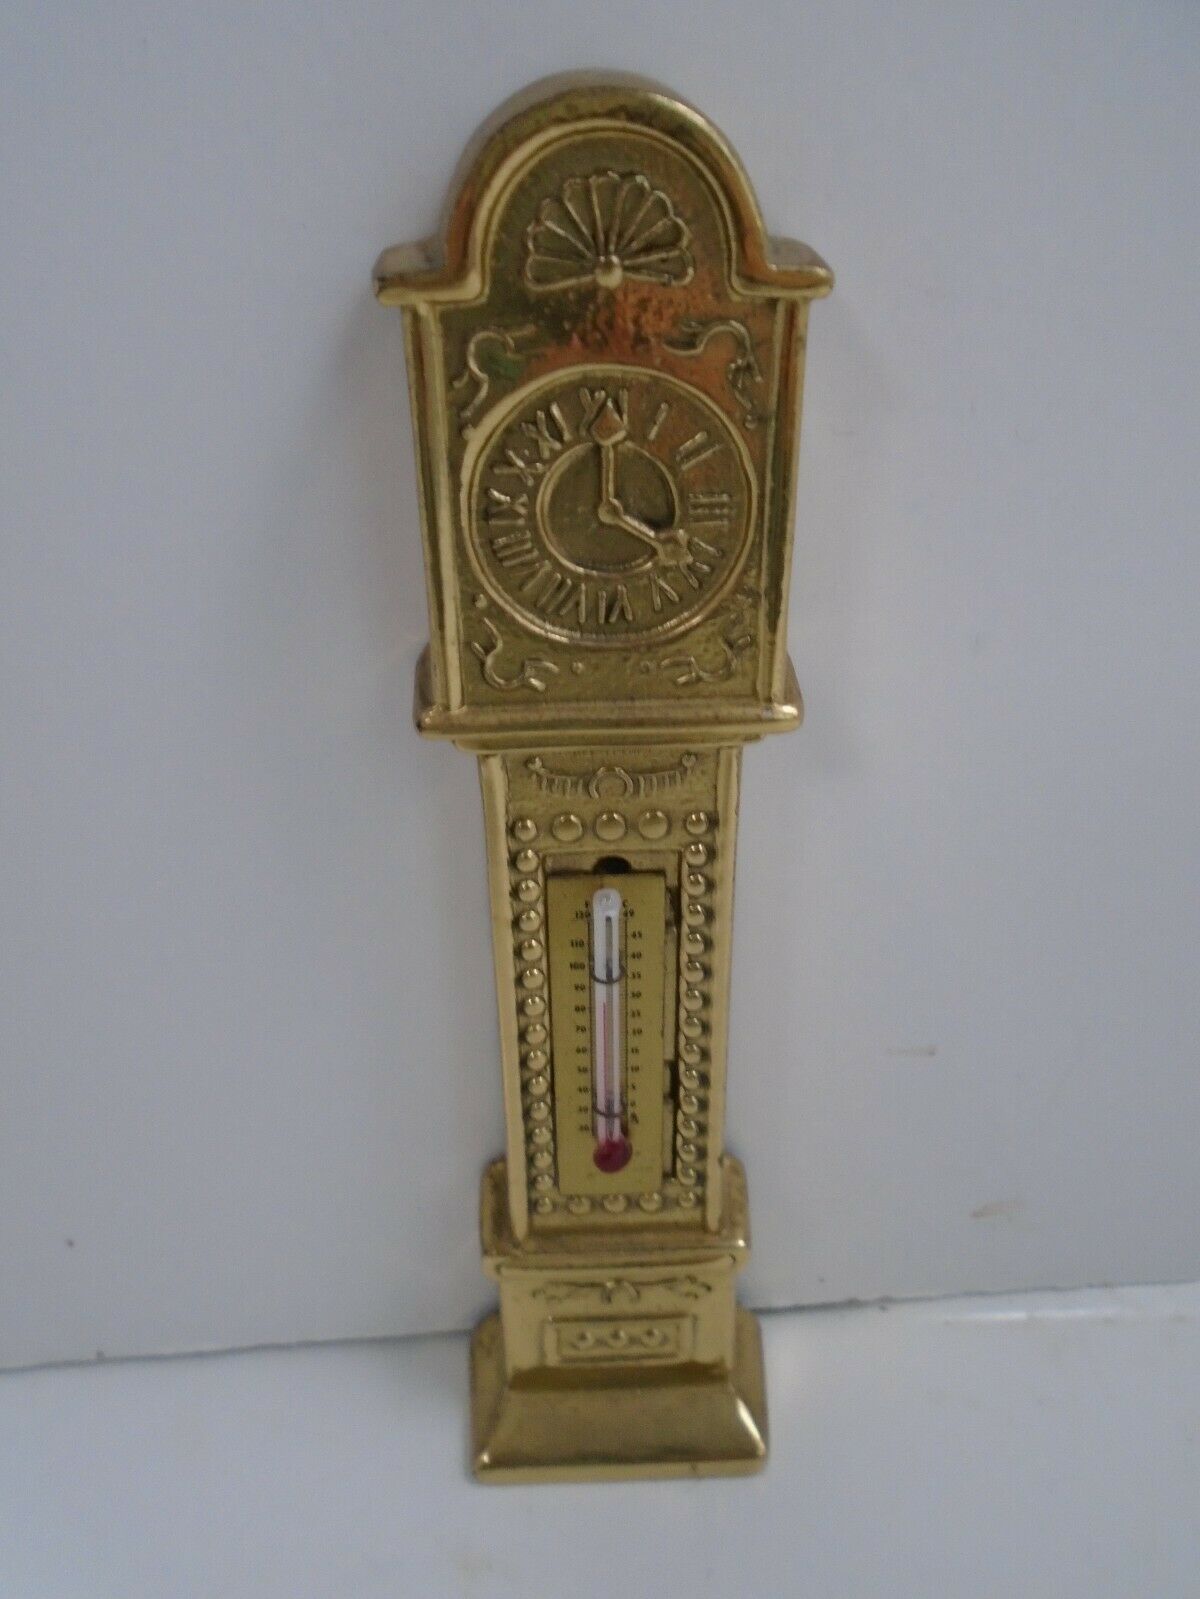 Vintage Brass Grandfather Clock Thermometer Made In England 6" Tall